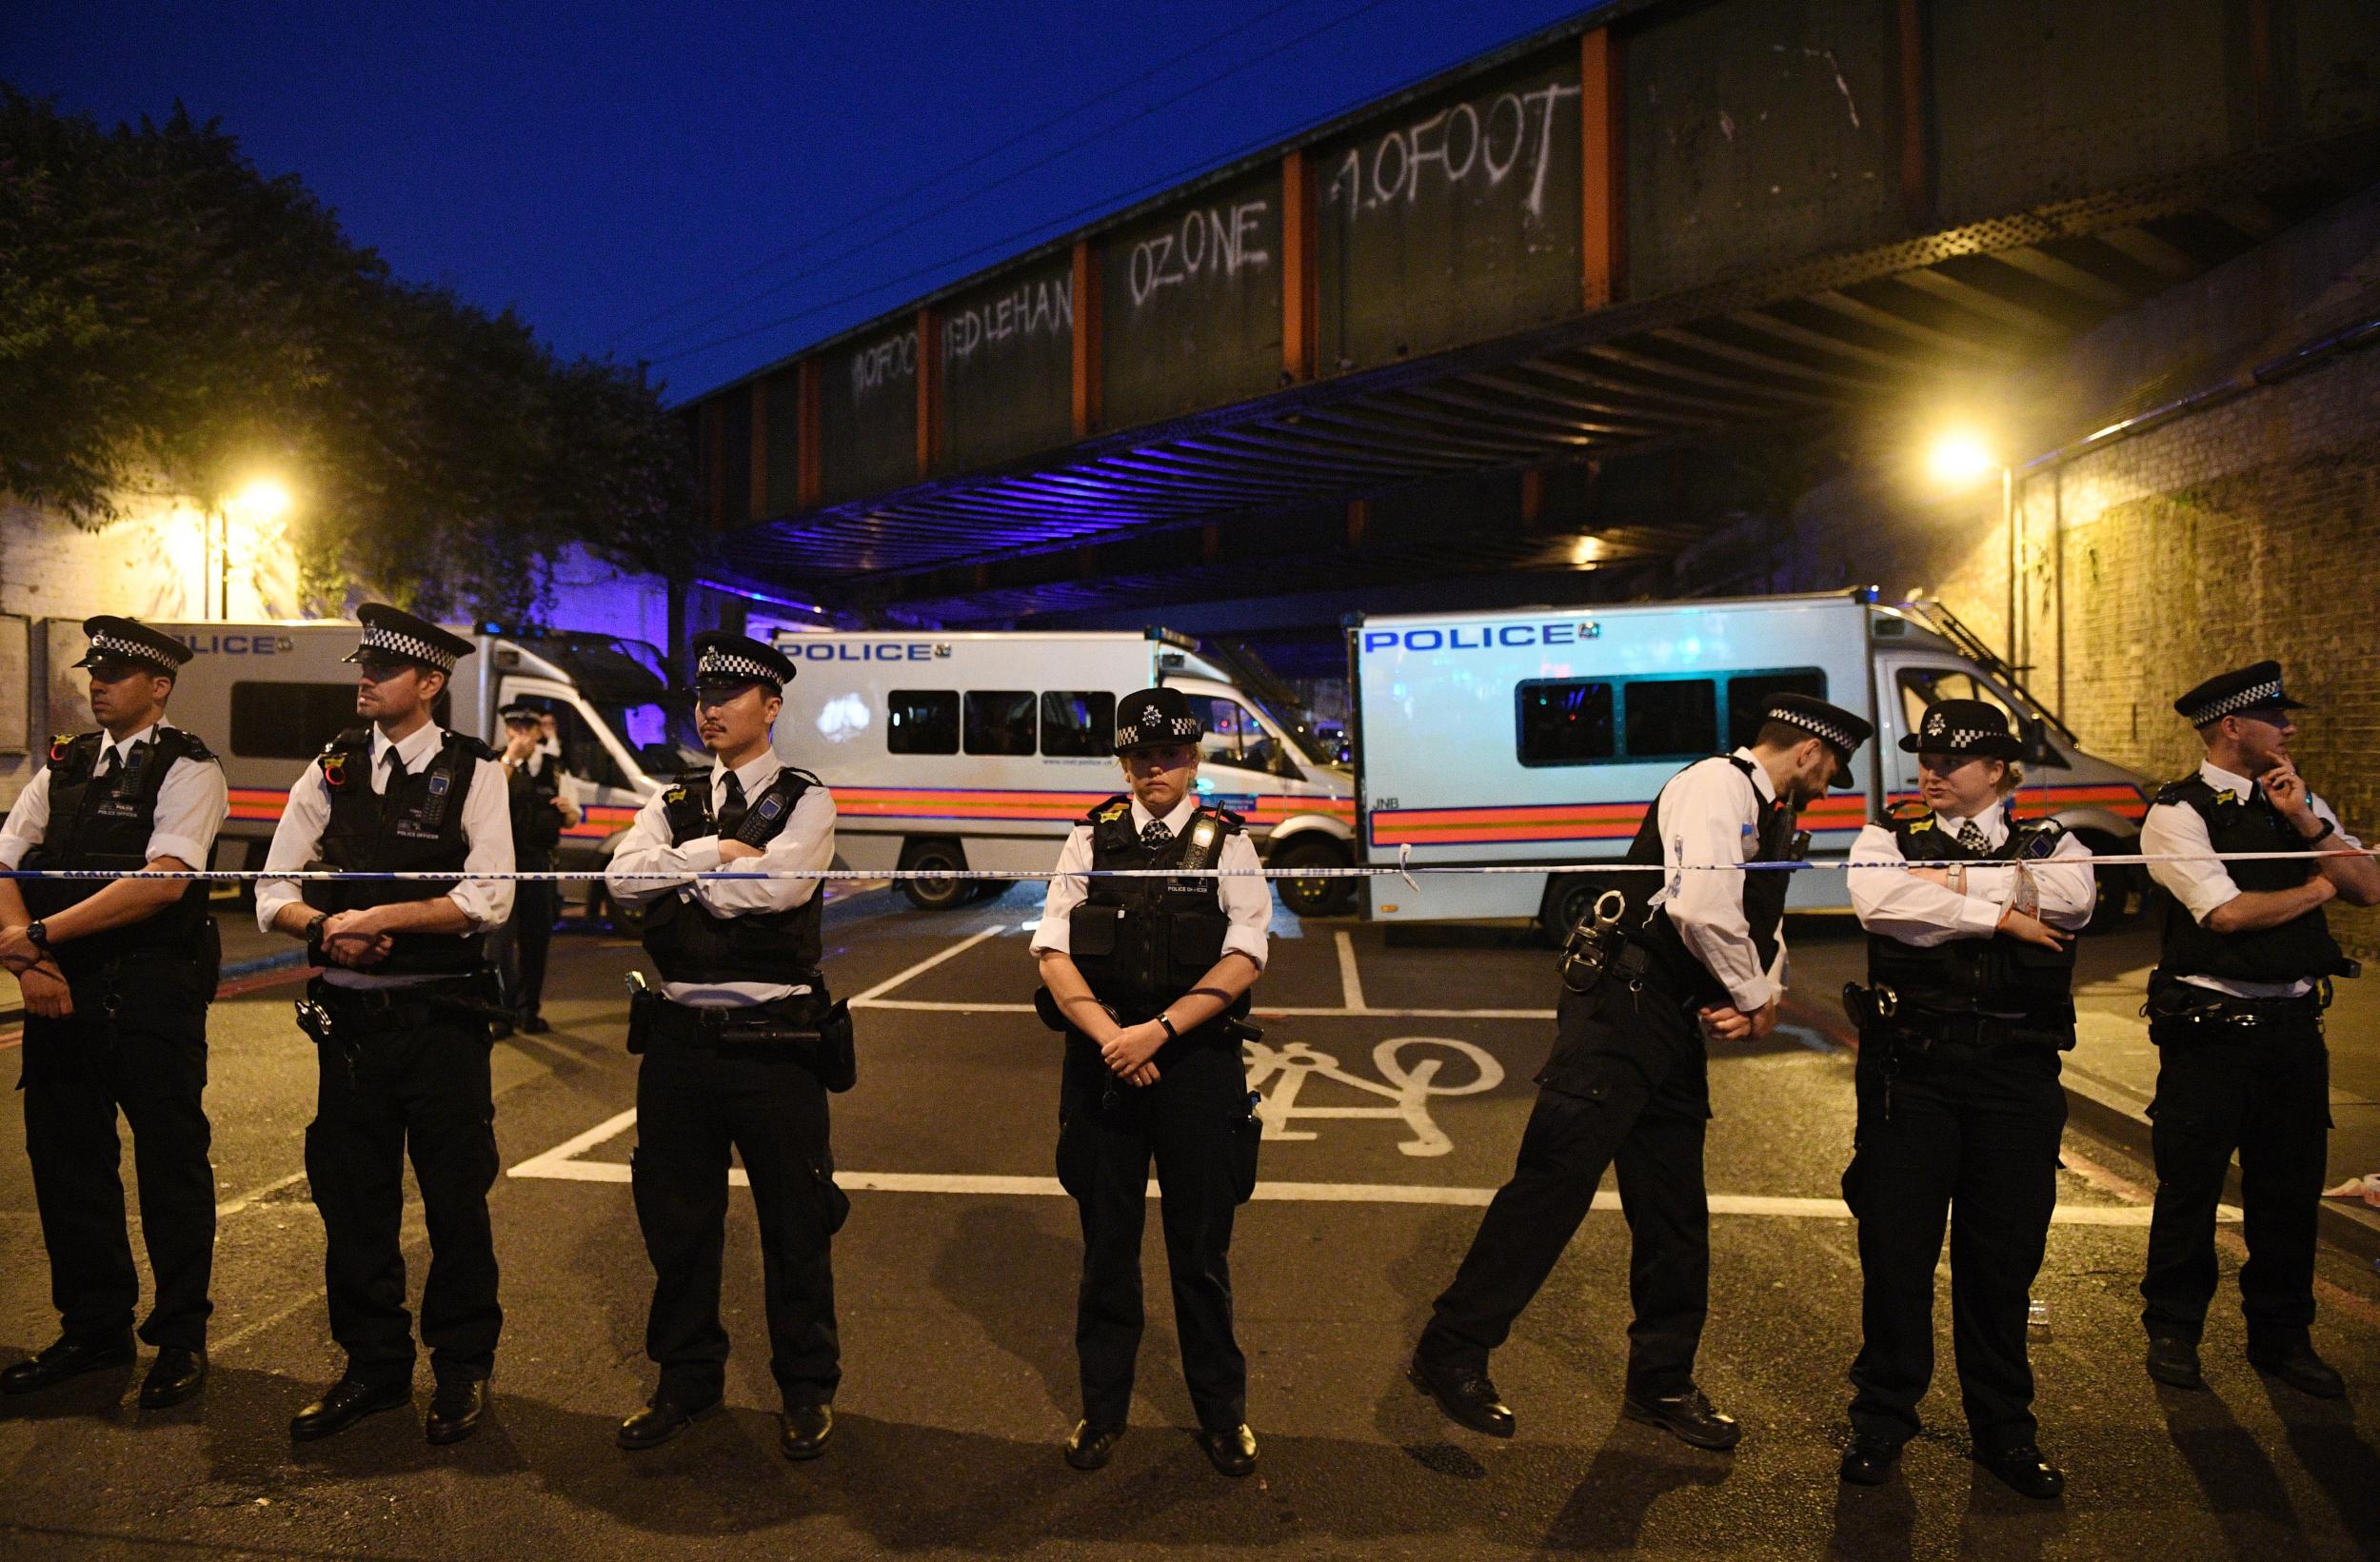 There have been five terror attacks in the UK this year, including one in Finsbury Park